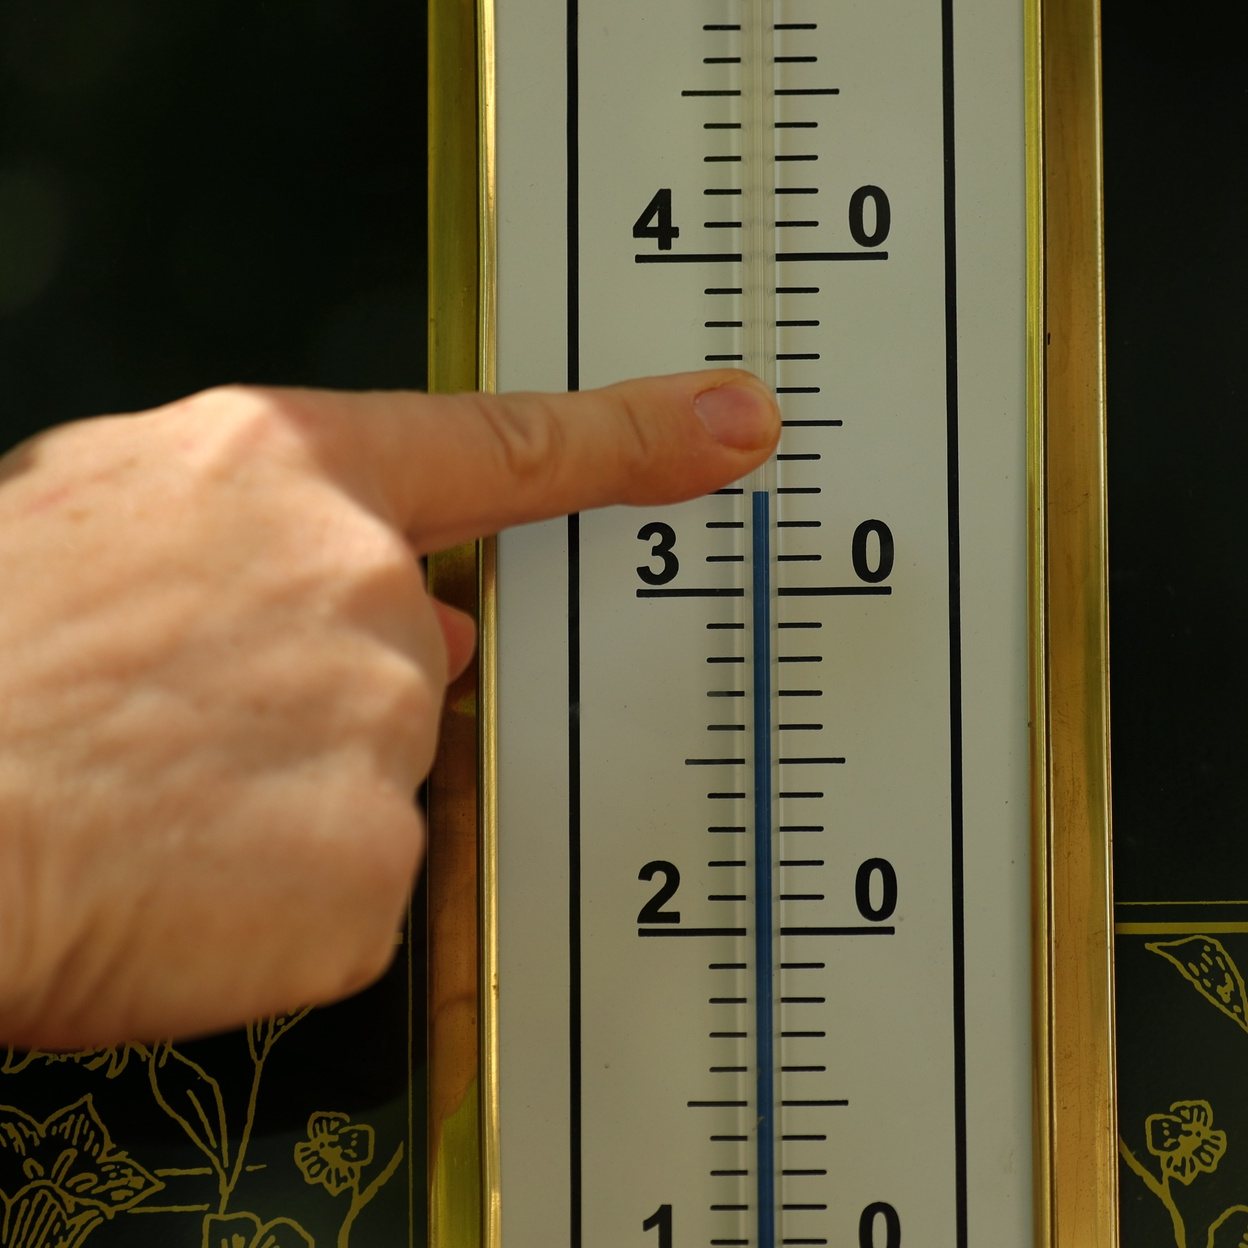 epa07677113 A Zagreb&#039; citizen points to the temperature on a thermometer at  Zrinjevac Park in downtown Zagreb, Croatia, 27 June 2019. Reports state that in the last few days Croatia and Zagreb recorded high temperatures between 33-38 degrees  Celsius or by the sea more than 38 celsius. Europe is bracing itself for a heatwave, as forcasters predict temperatures are expected to climb above 40 degrees Celsius in some areas due to The exceptionally hot air that has arrived from the Sahara.  EPA/ANTONIO BAT